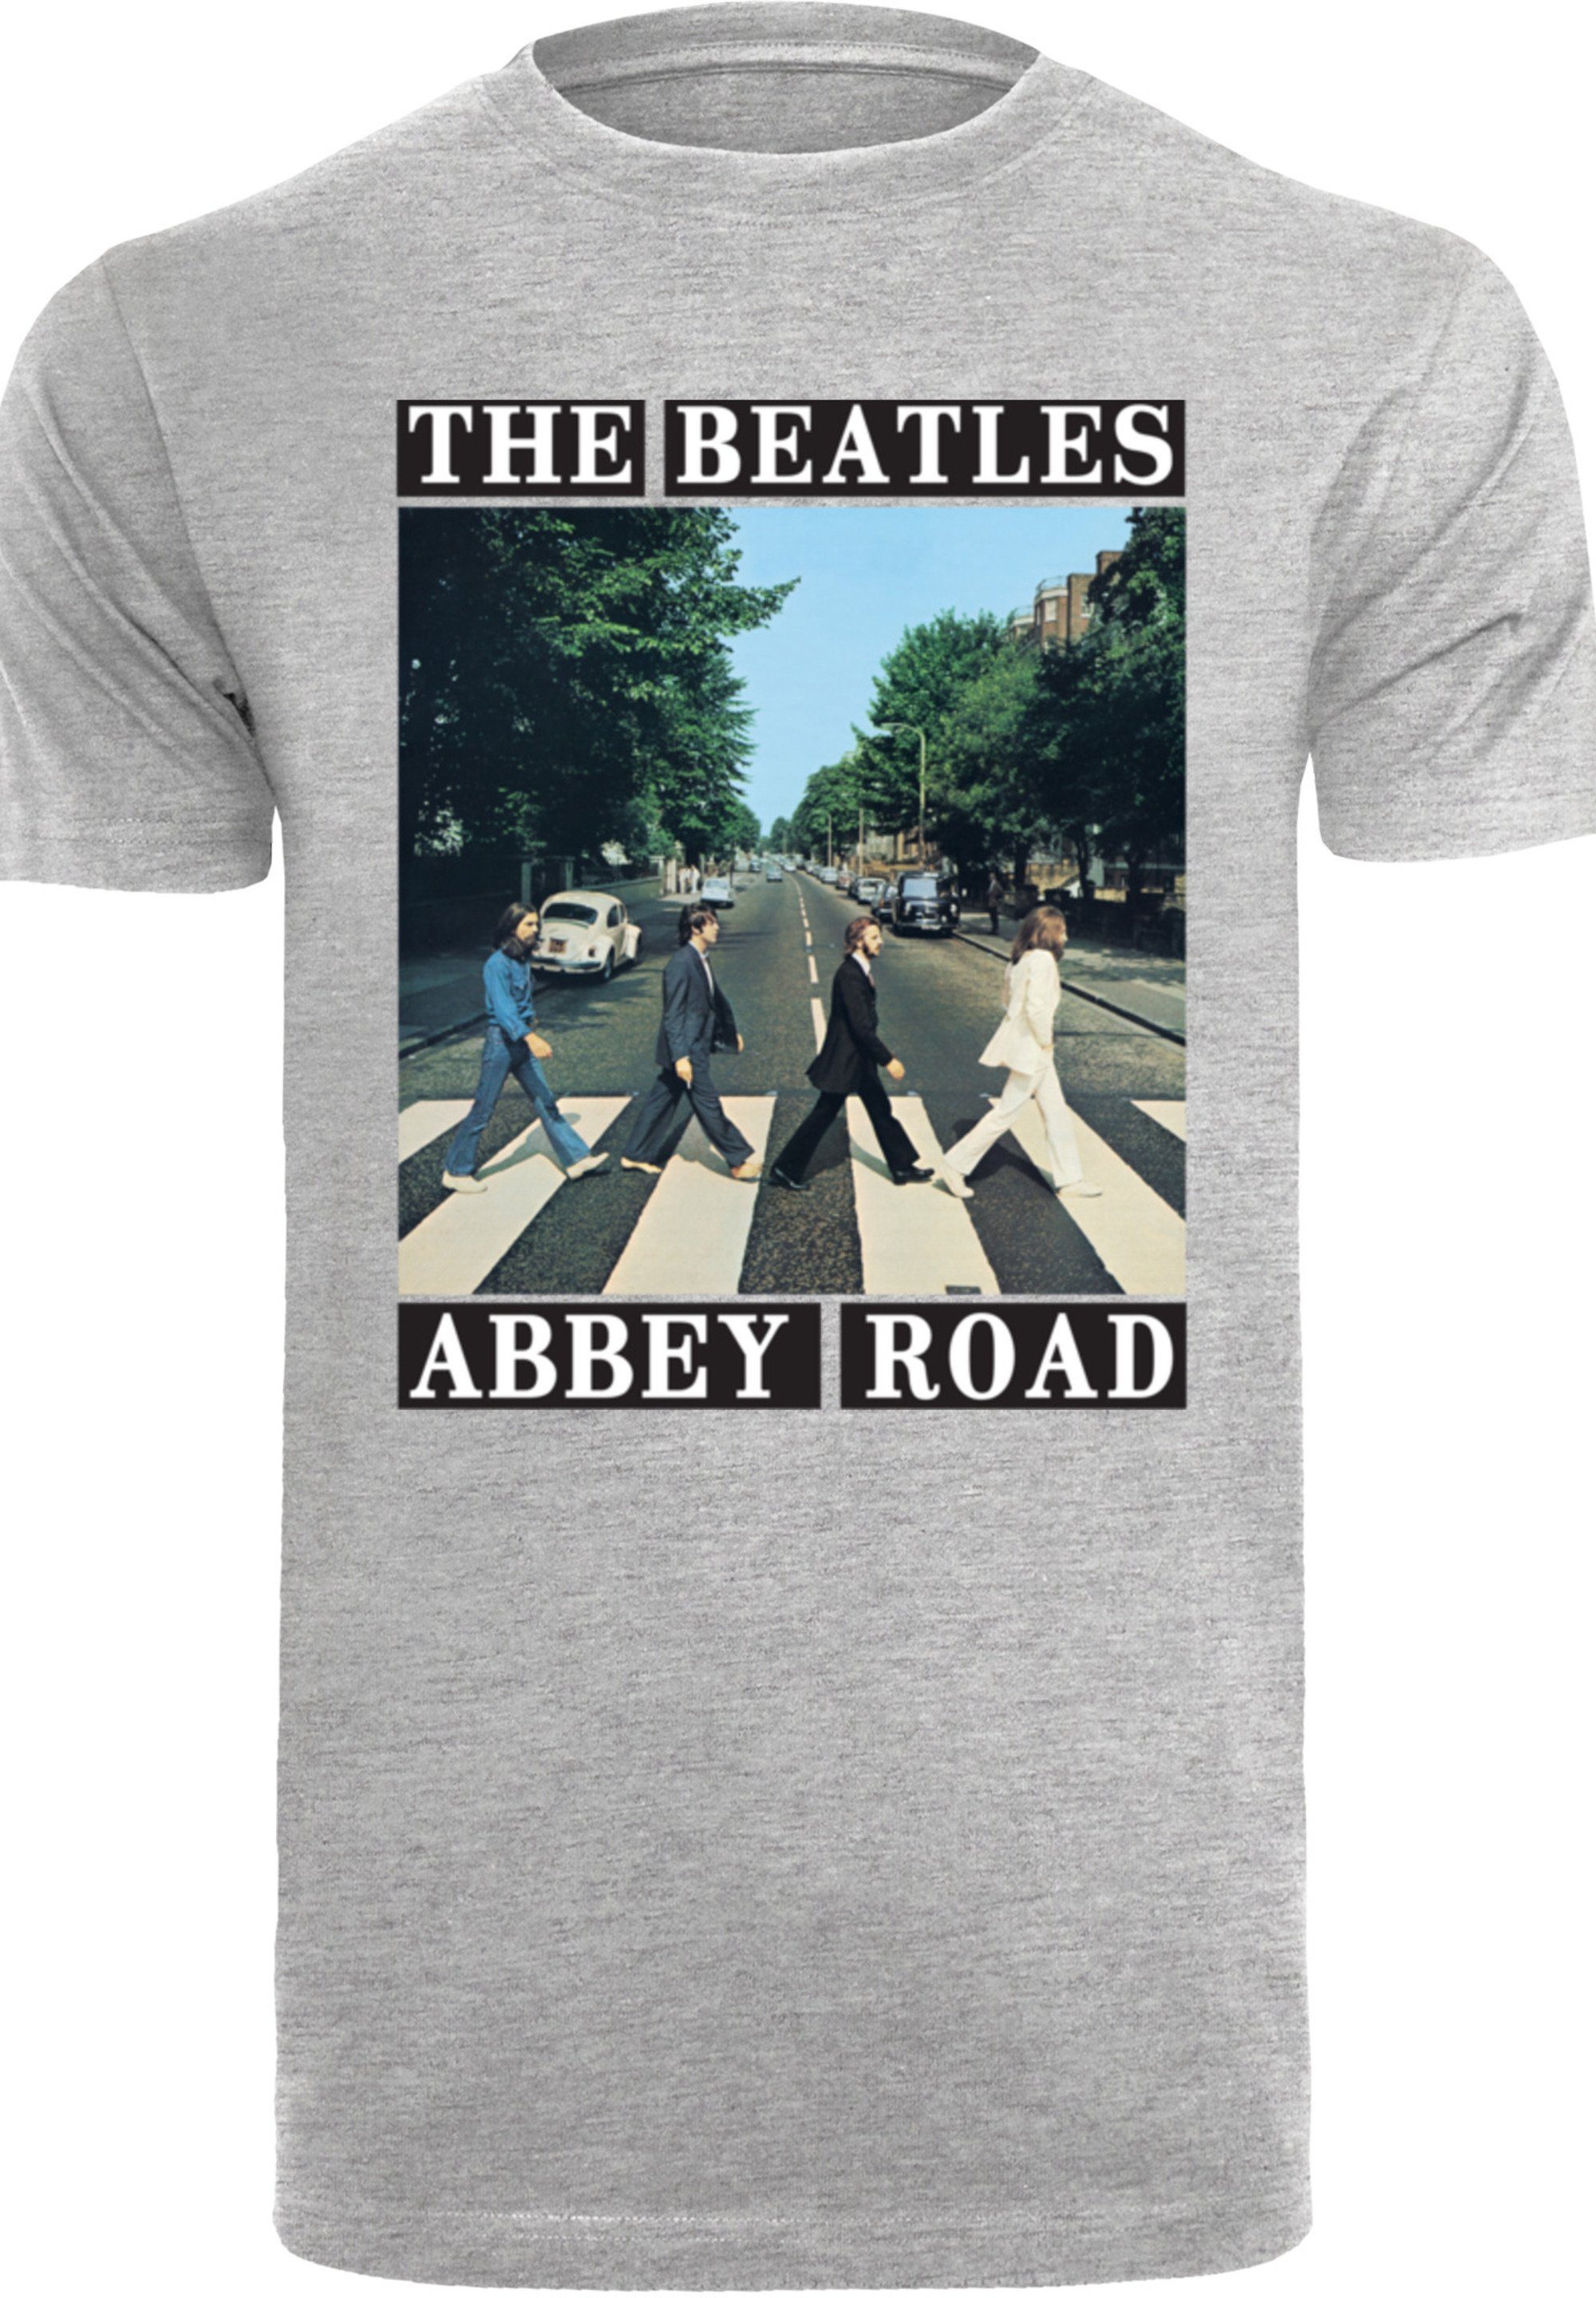 T-Shirt Print Band grey heather Beatles Abbey The Road F4NT4STIC